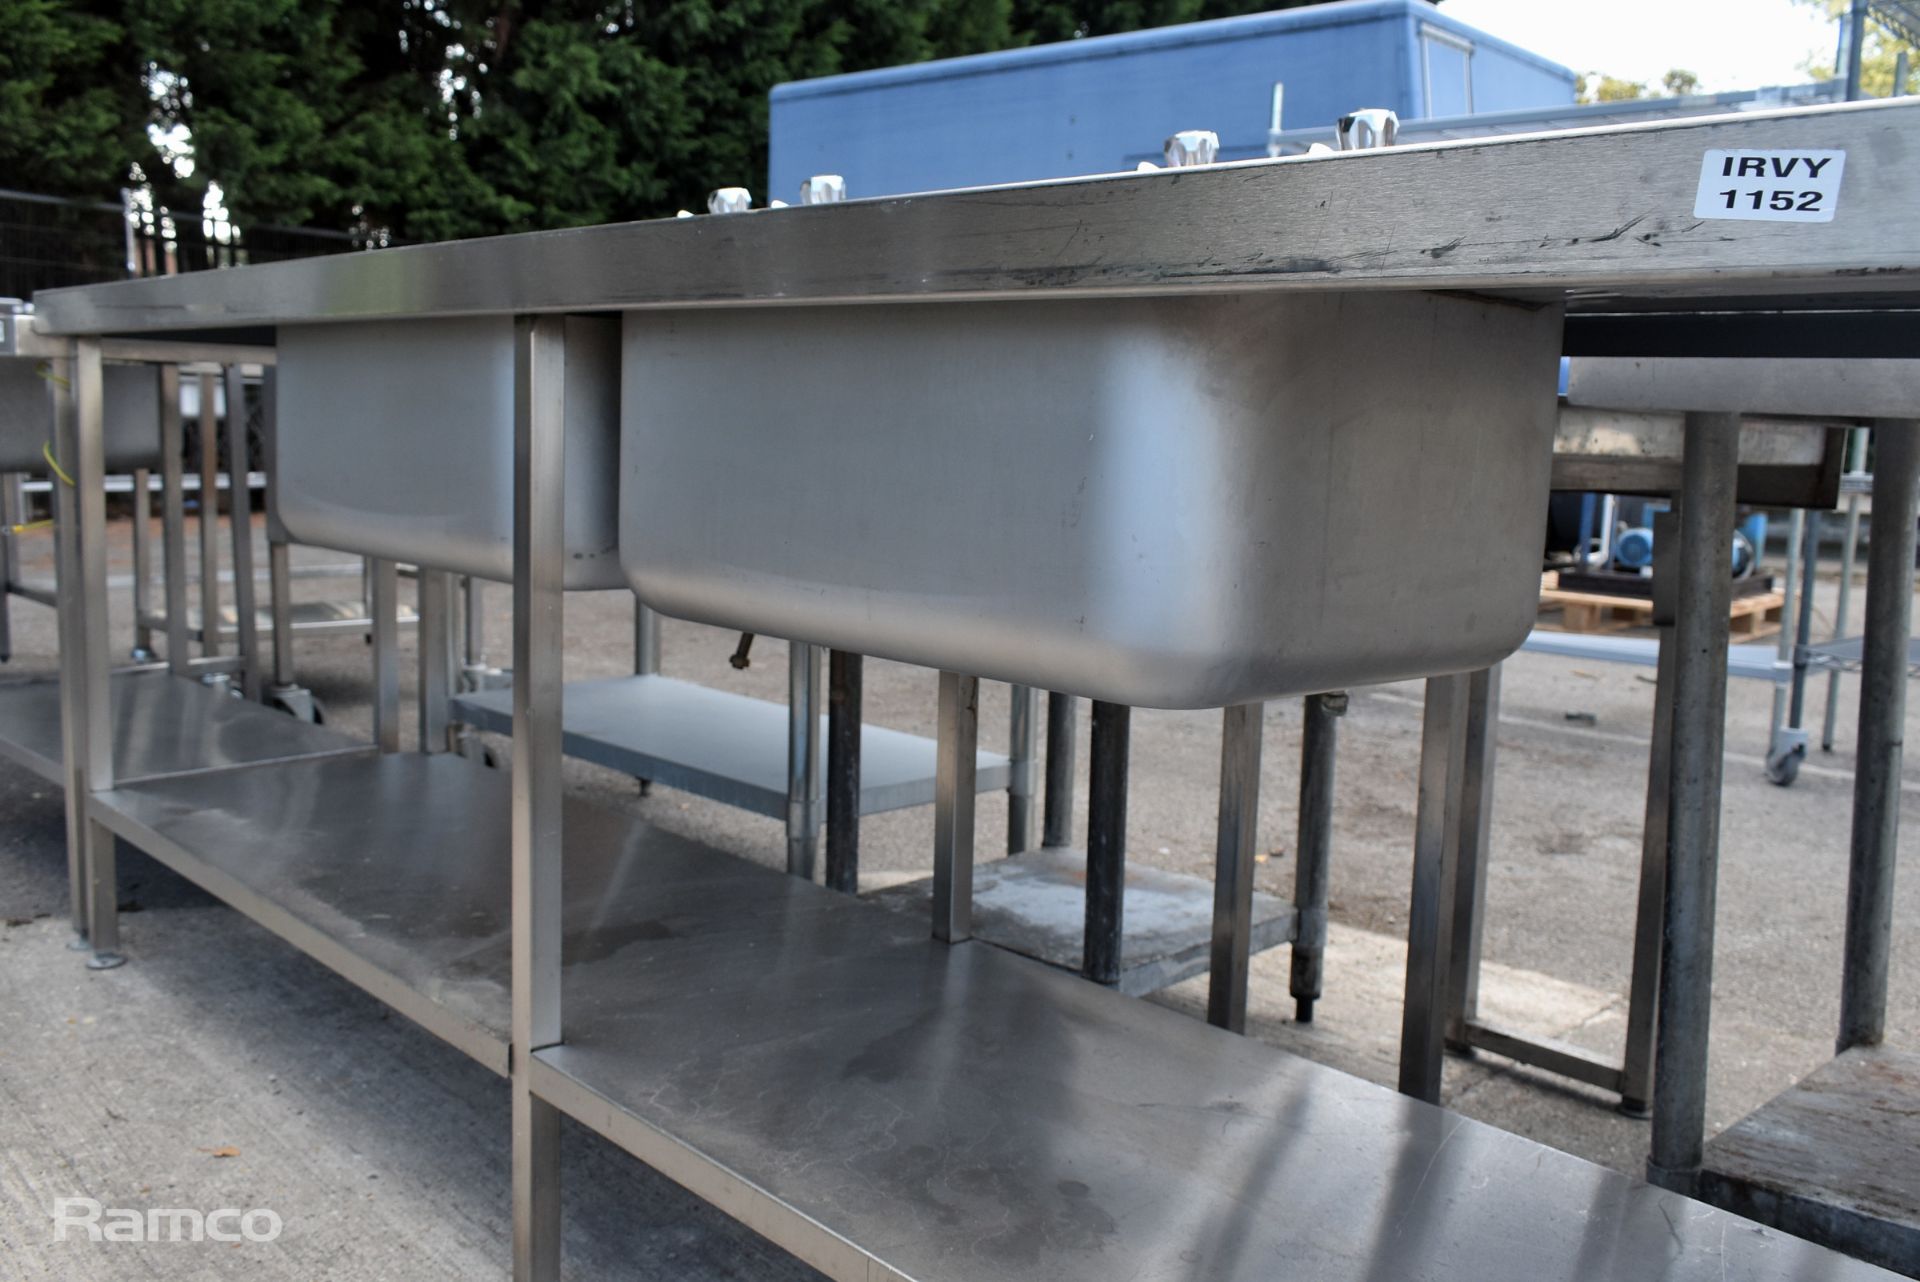 Stainless steel large double sink unit with lower shelf - W 2400 x D 650 x H 1030mm - Image 6 of 6